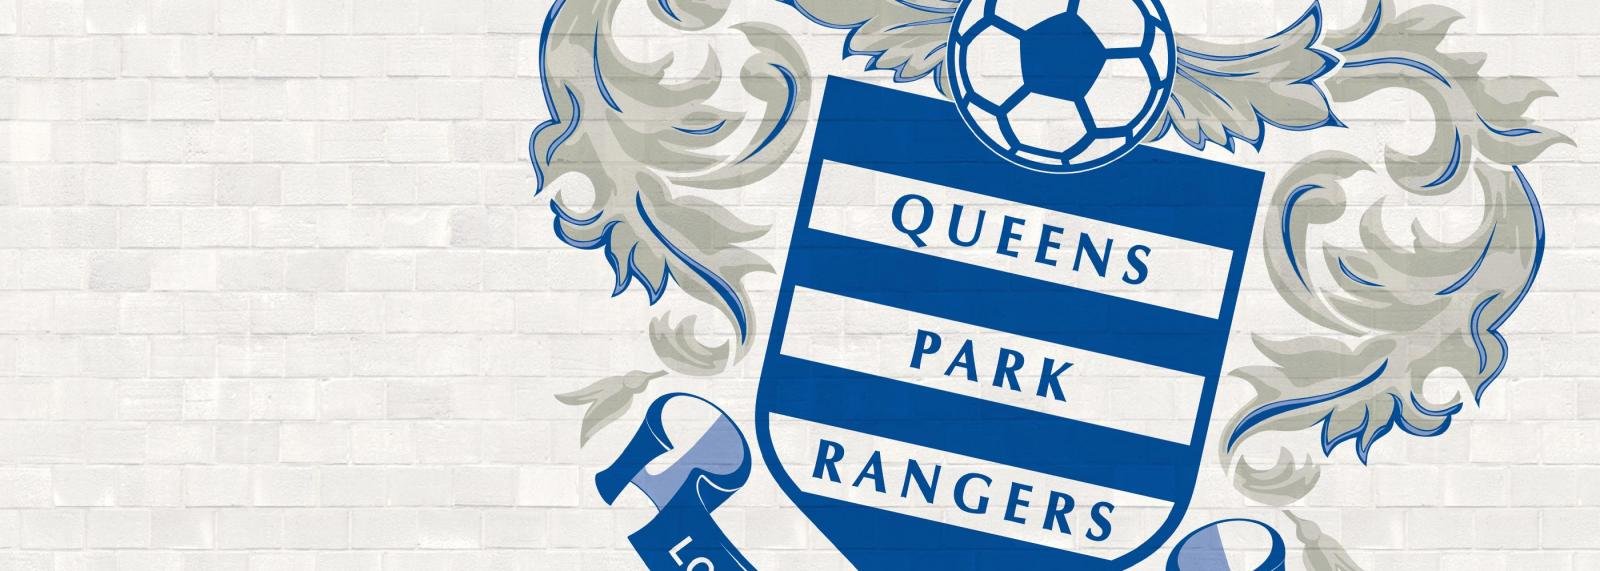 Nedum Onuoha is NOT the right man to lead QPR